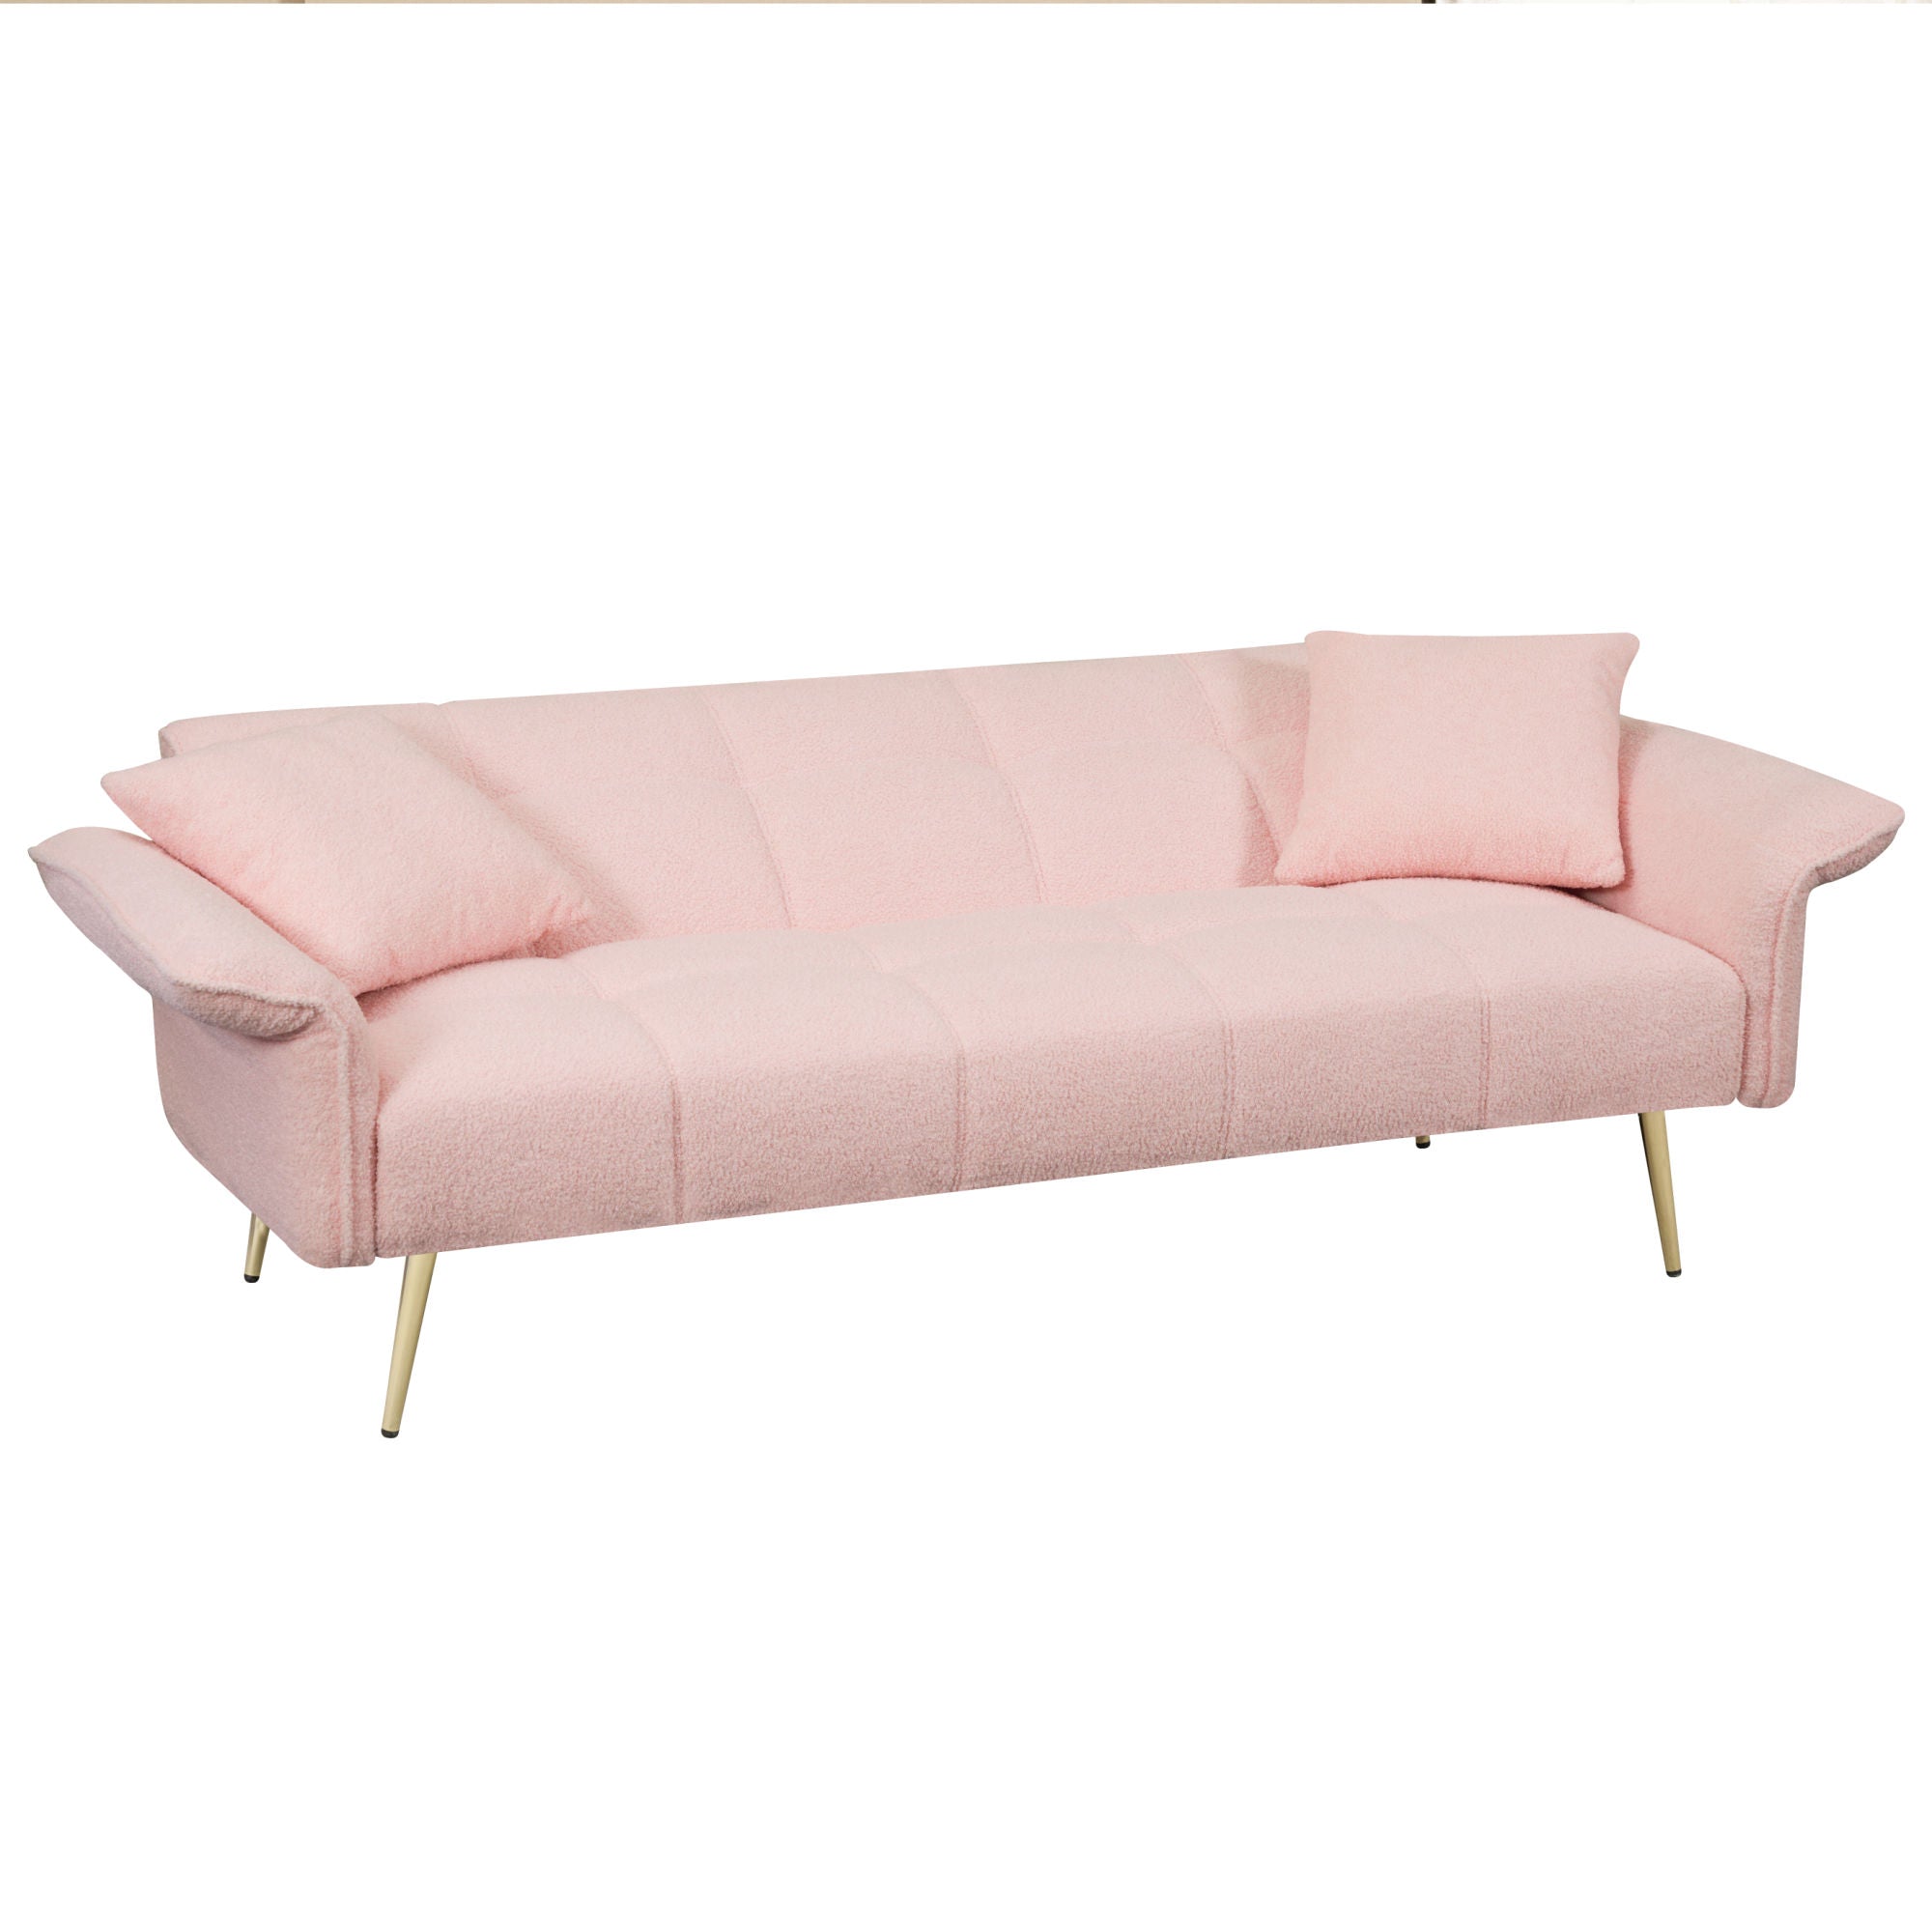 Modern Love Teddy Fleece Sofabed, Convertible Futon with Adjustable Arms and Backrest, for Living Room and Bedroom,